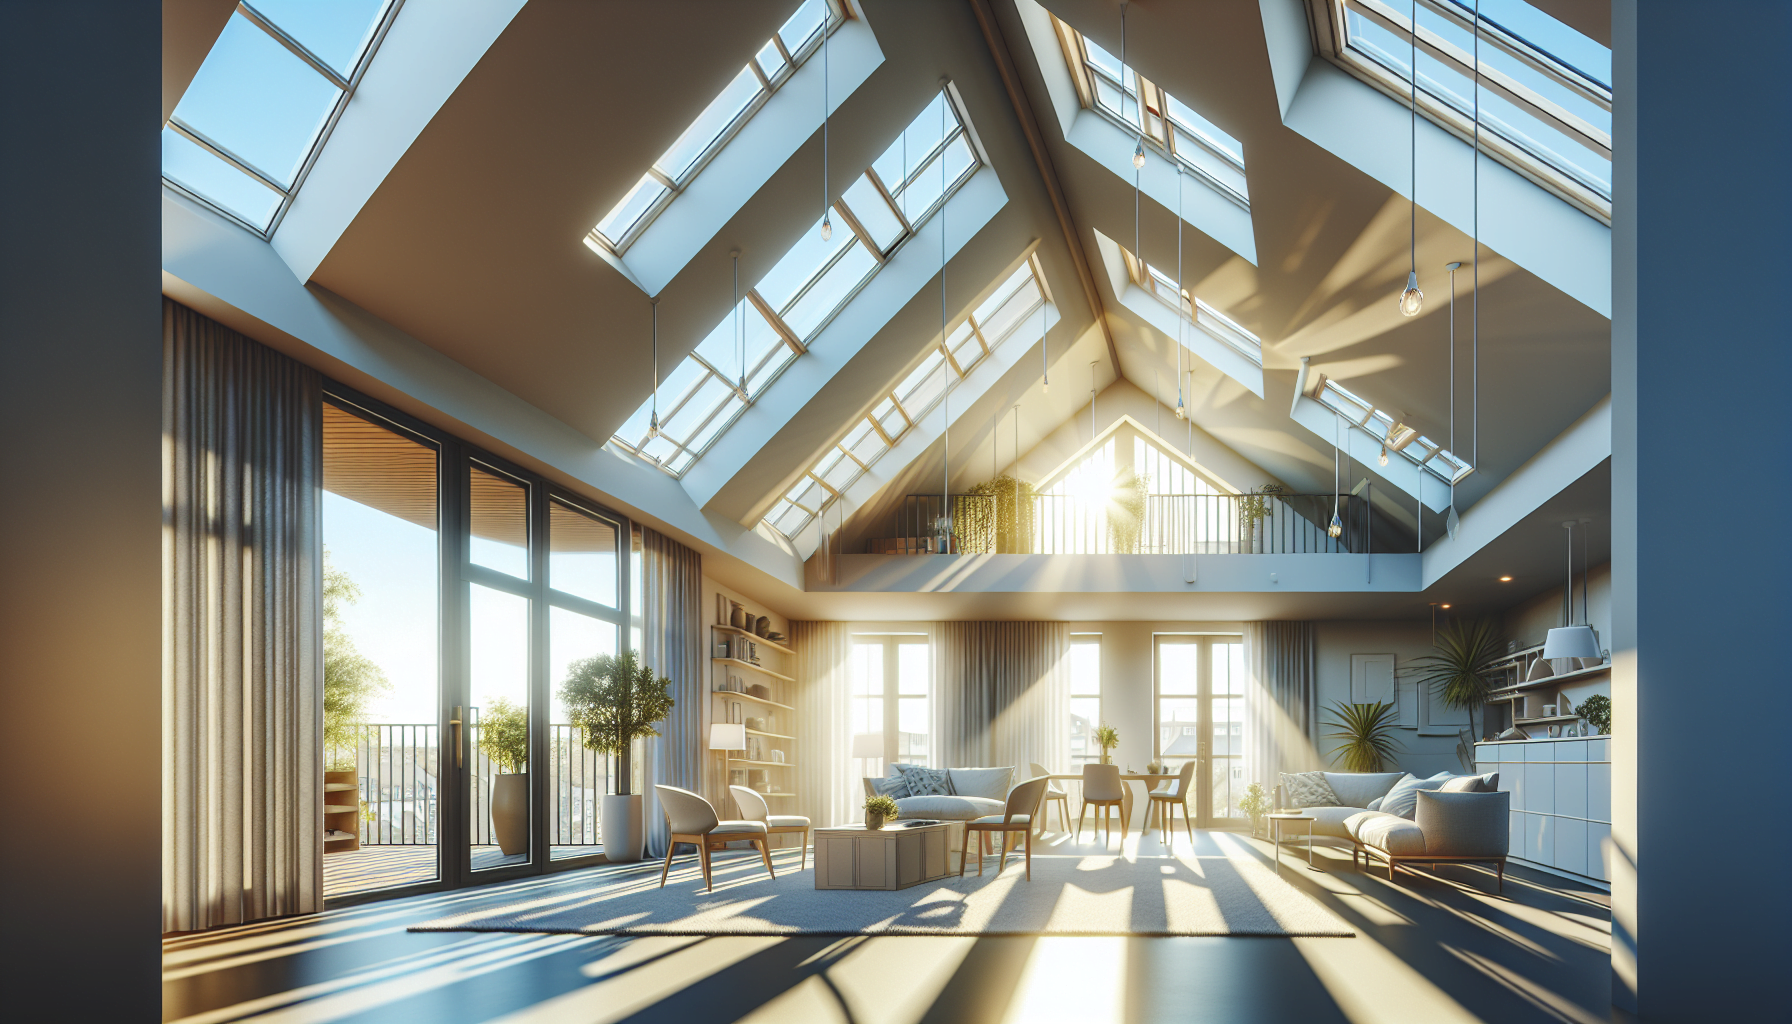 Illustration of natural light and ventilation in a loft conversion